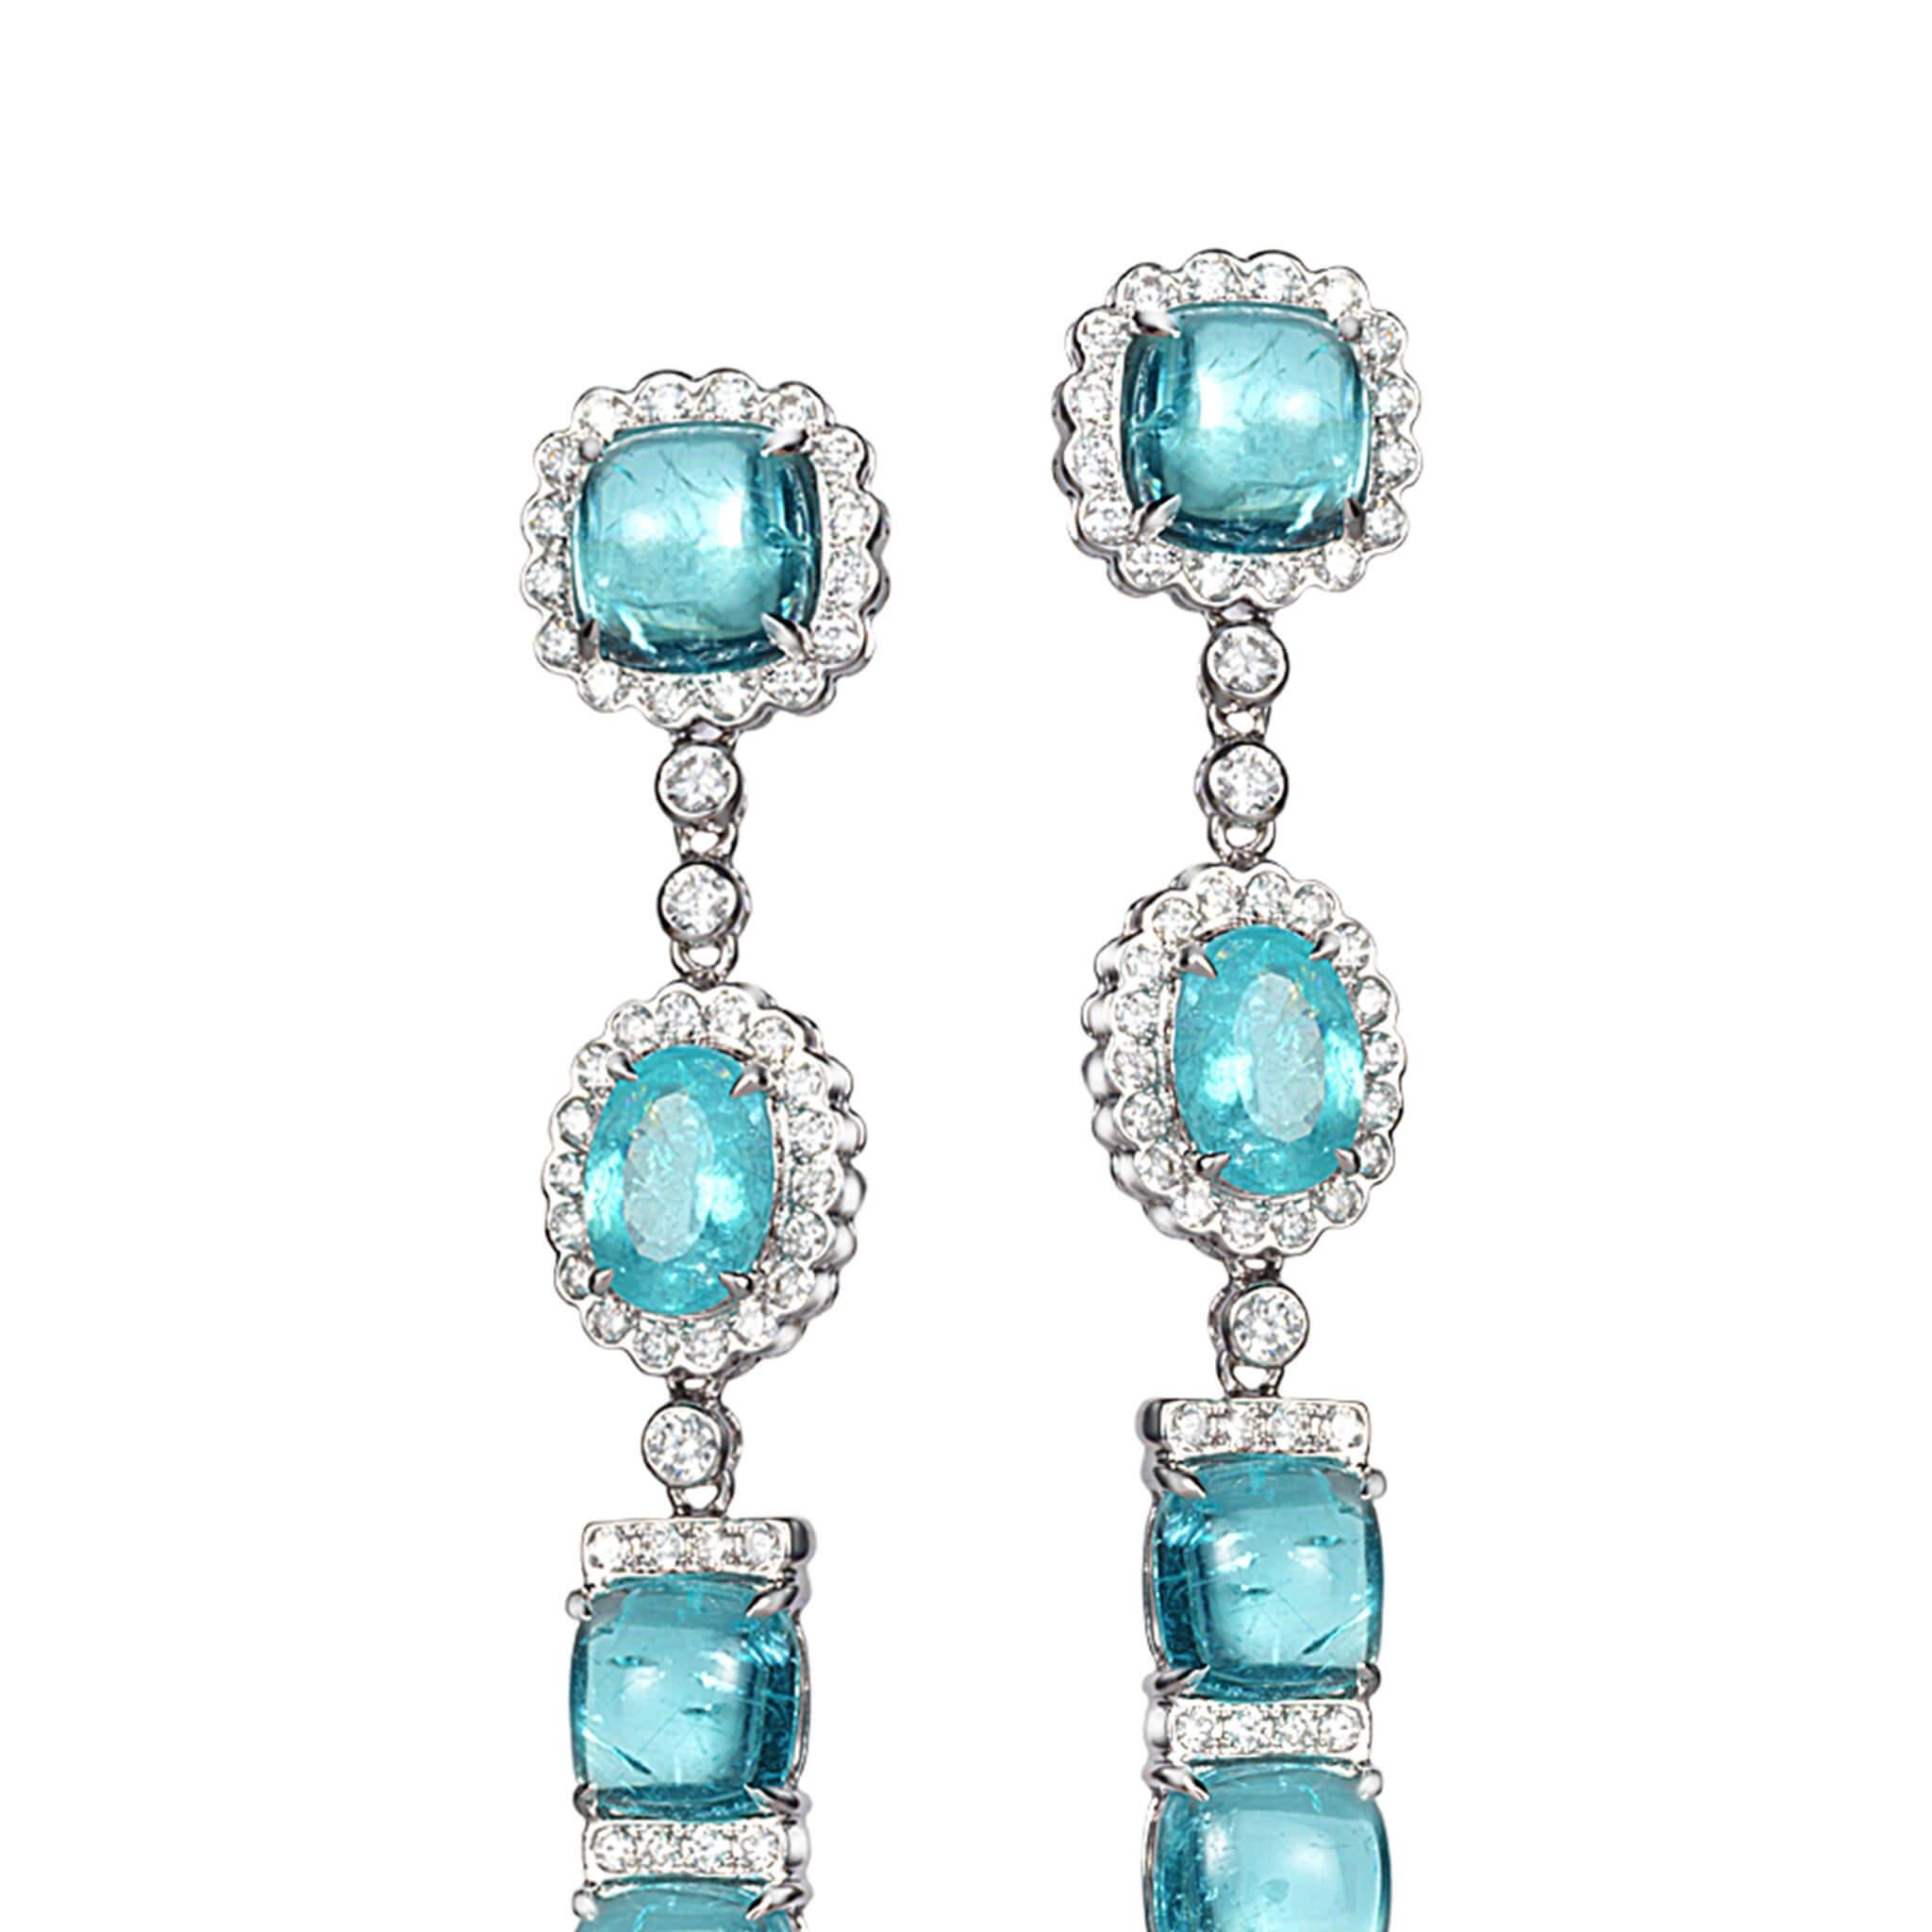 Trinity long earrings set in 18K white gold with 15.36cts paraiba tourmaline and 1.19cts diamond.
